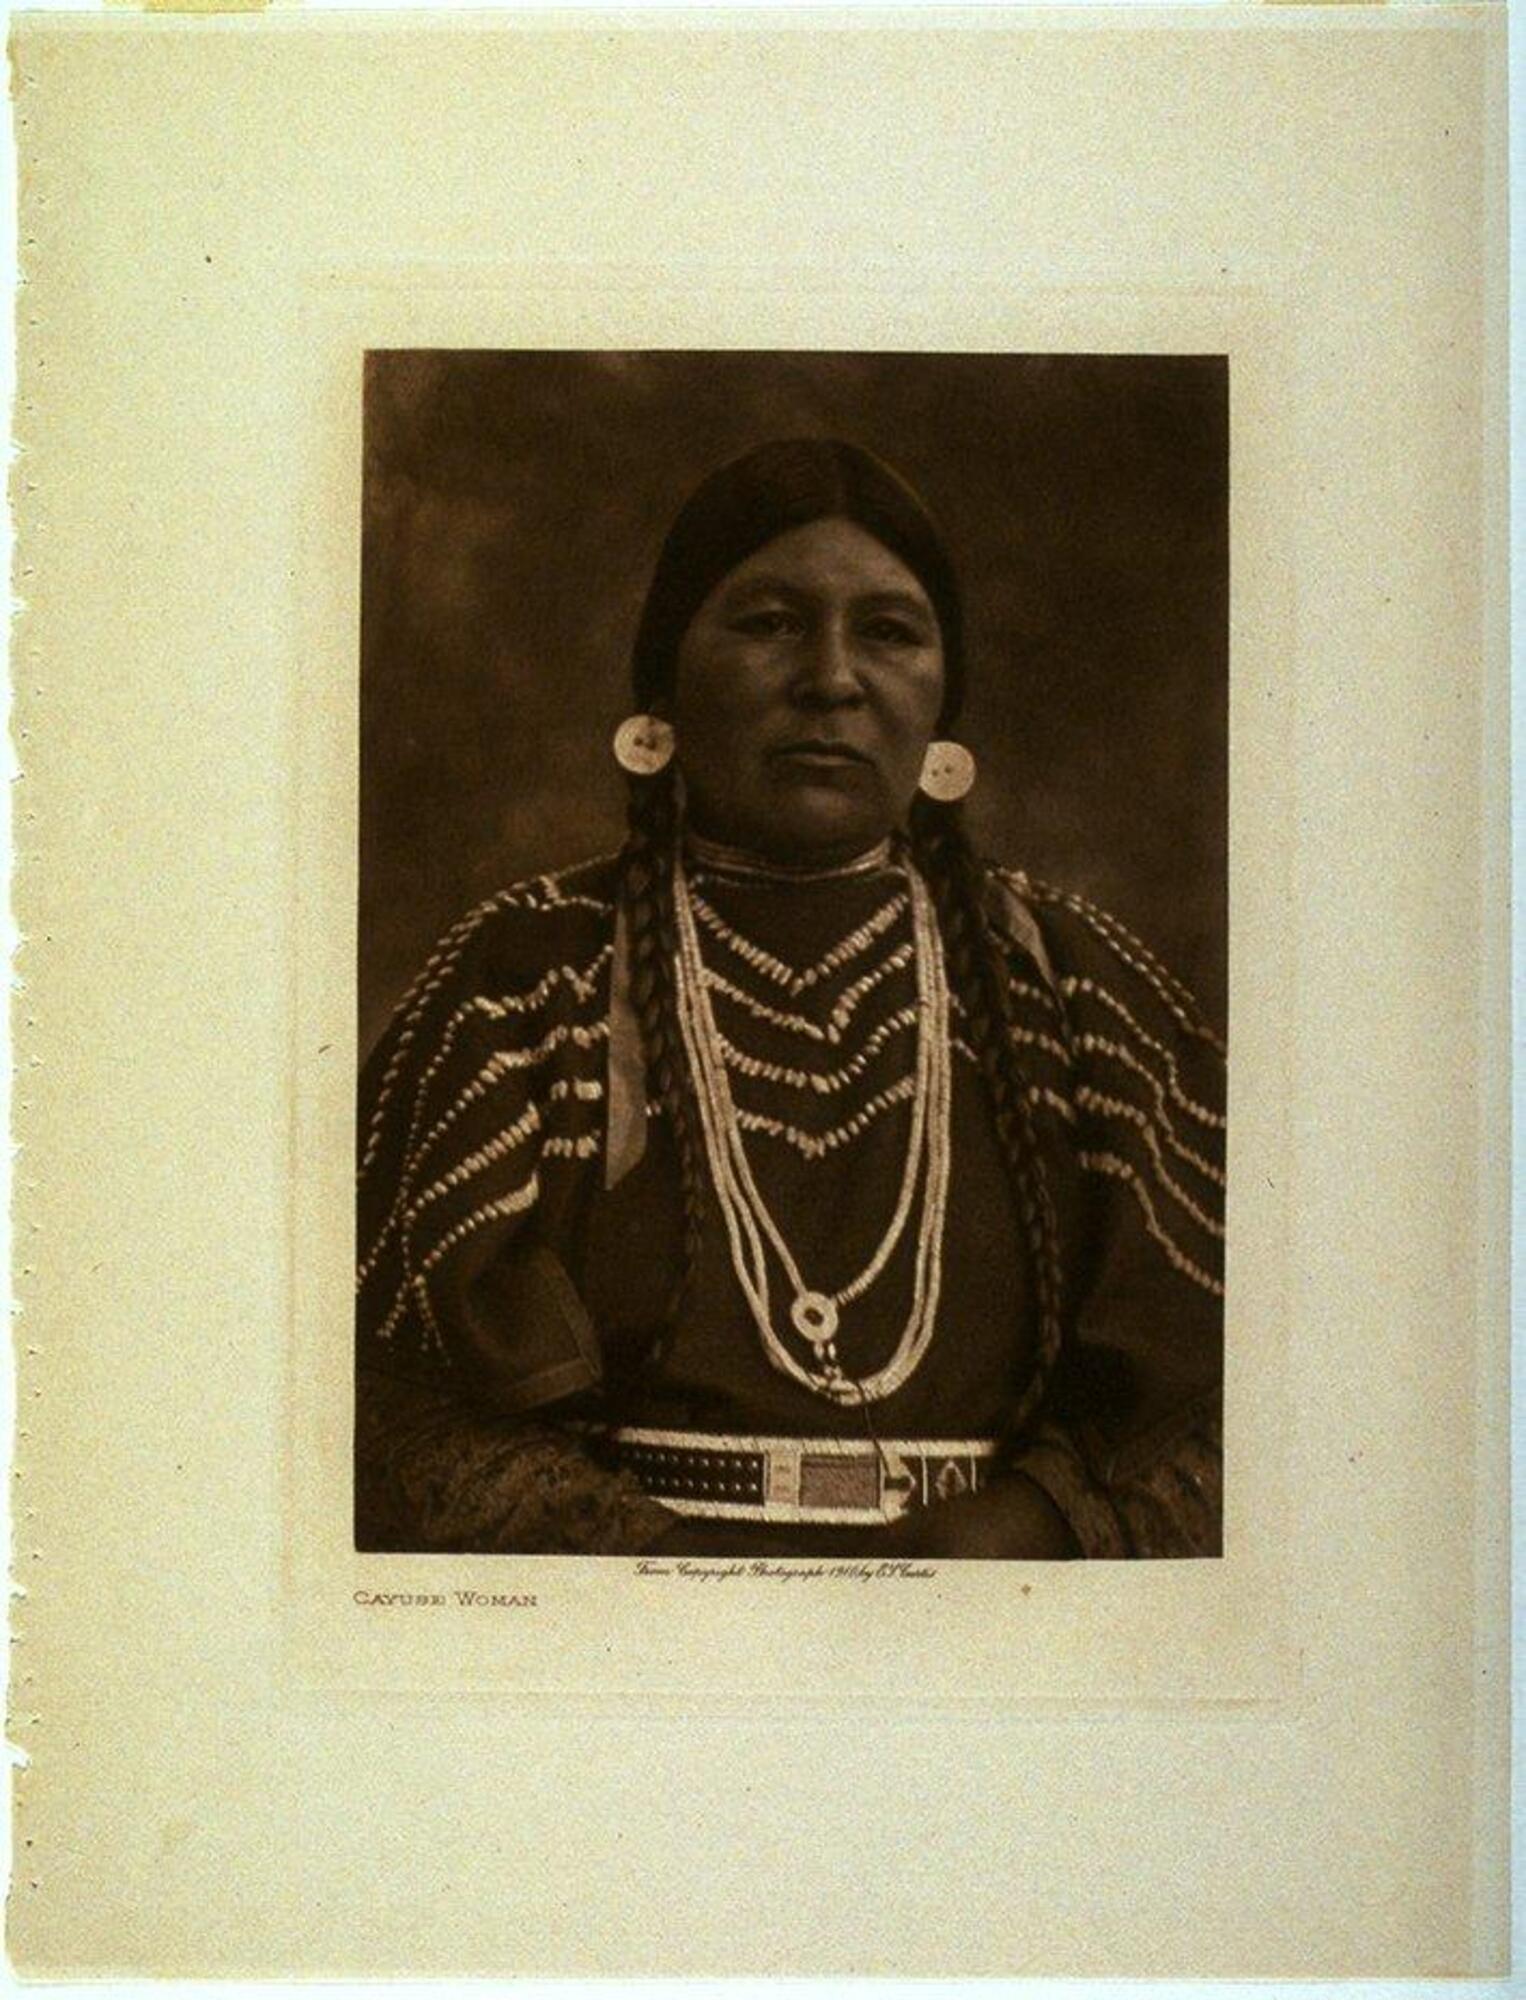 A portrait of a woman with long braids, large earrings, and beaded jewelry. She wears a shirt with geometric lines embroidered into the fabric, and an ornate belt.